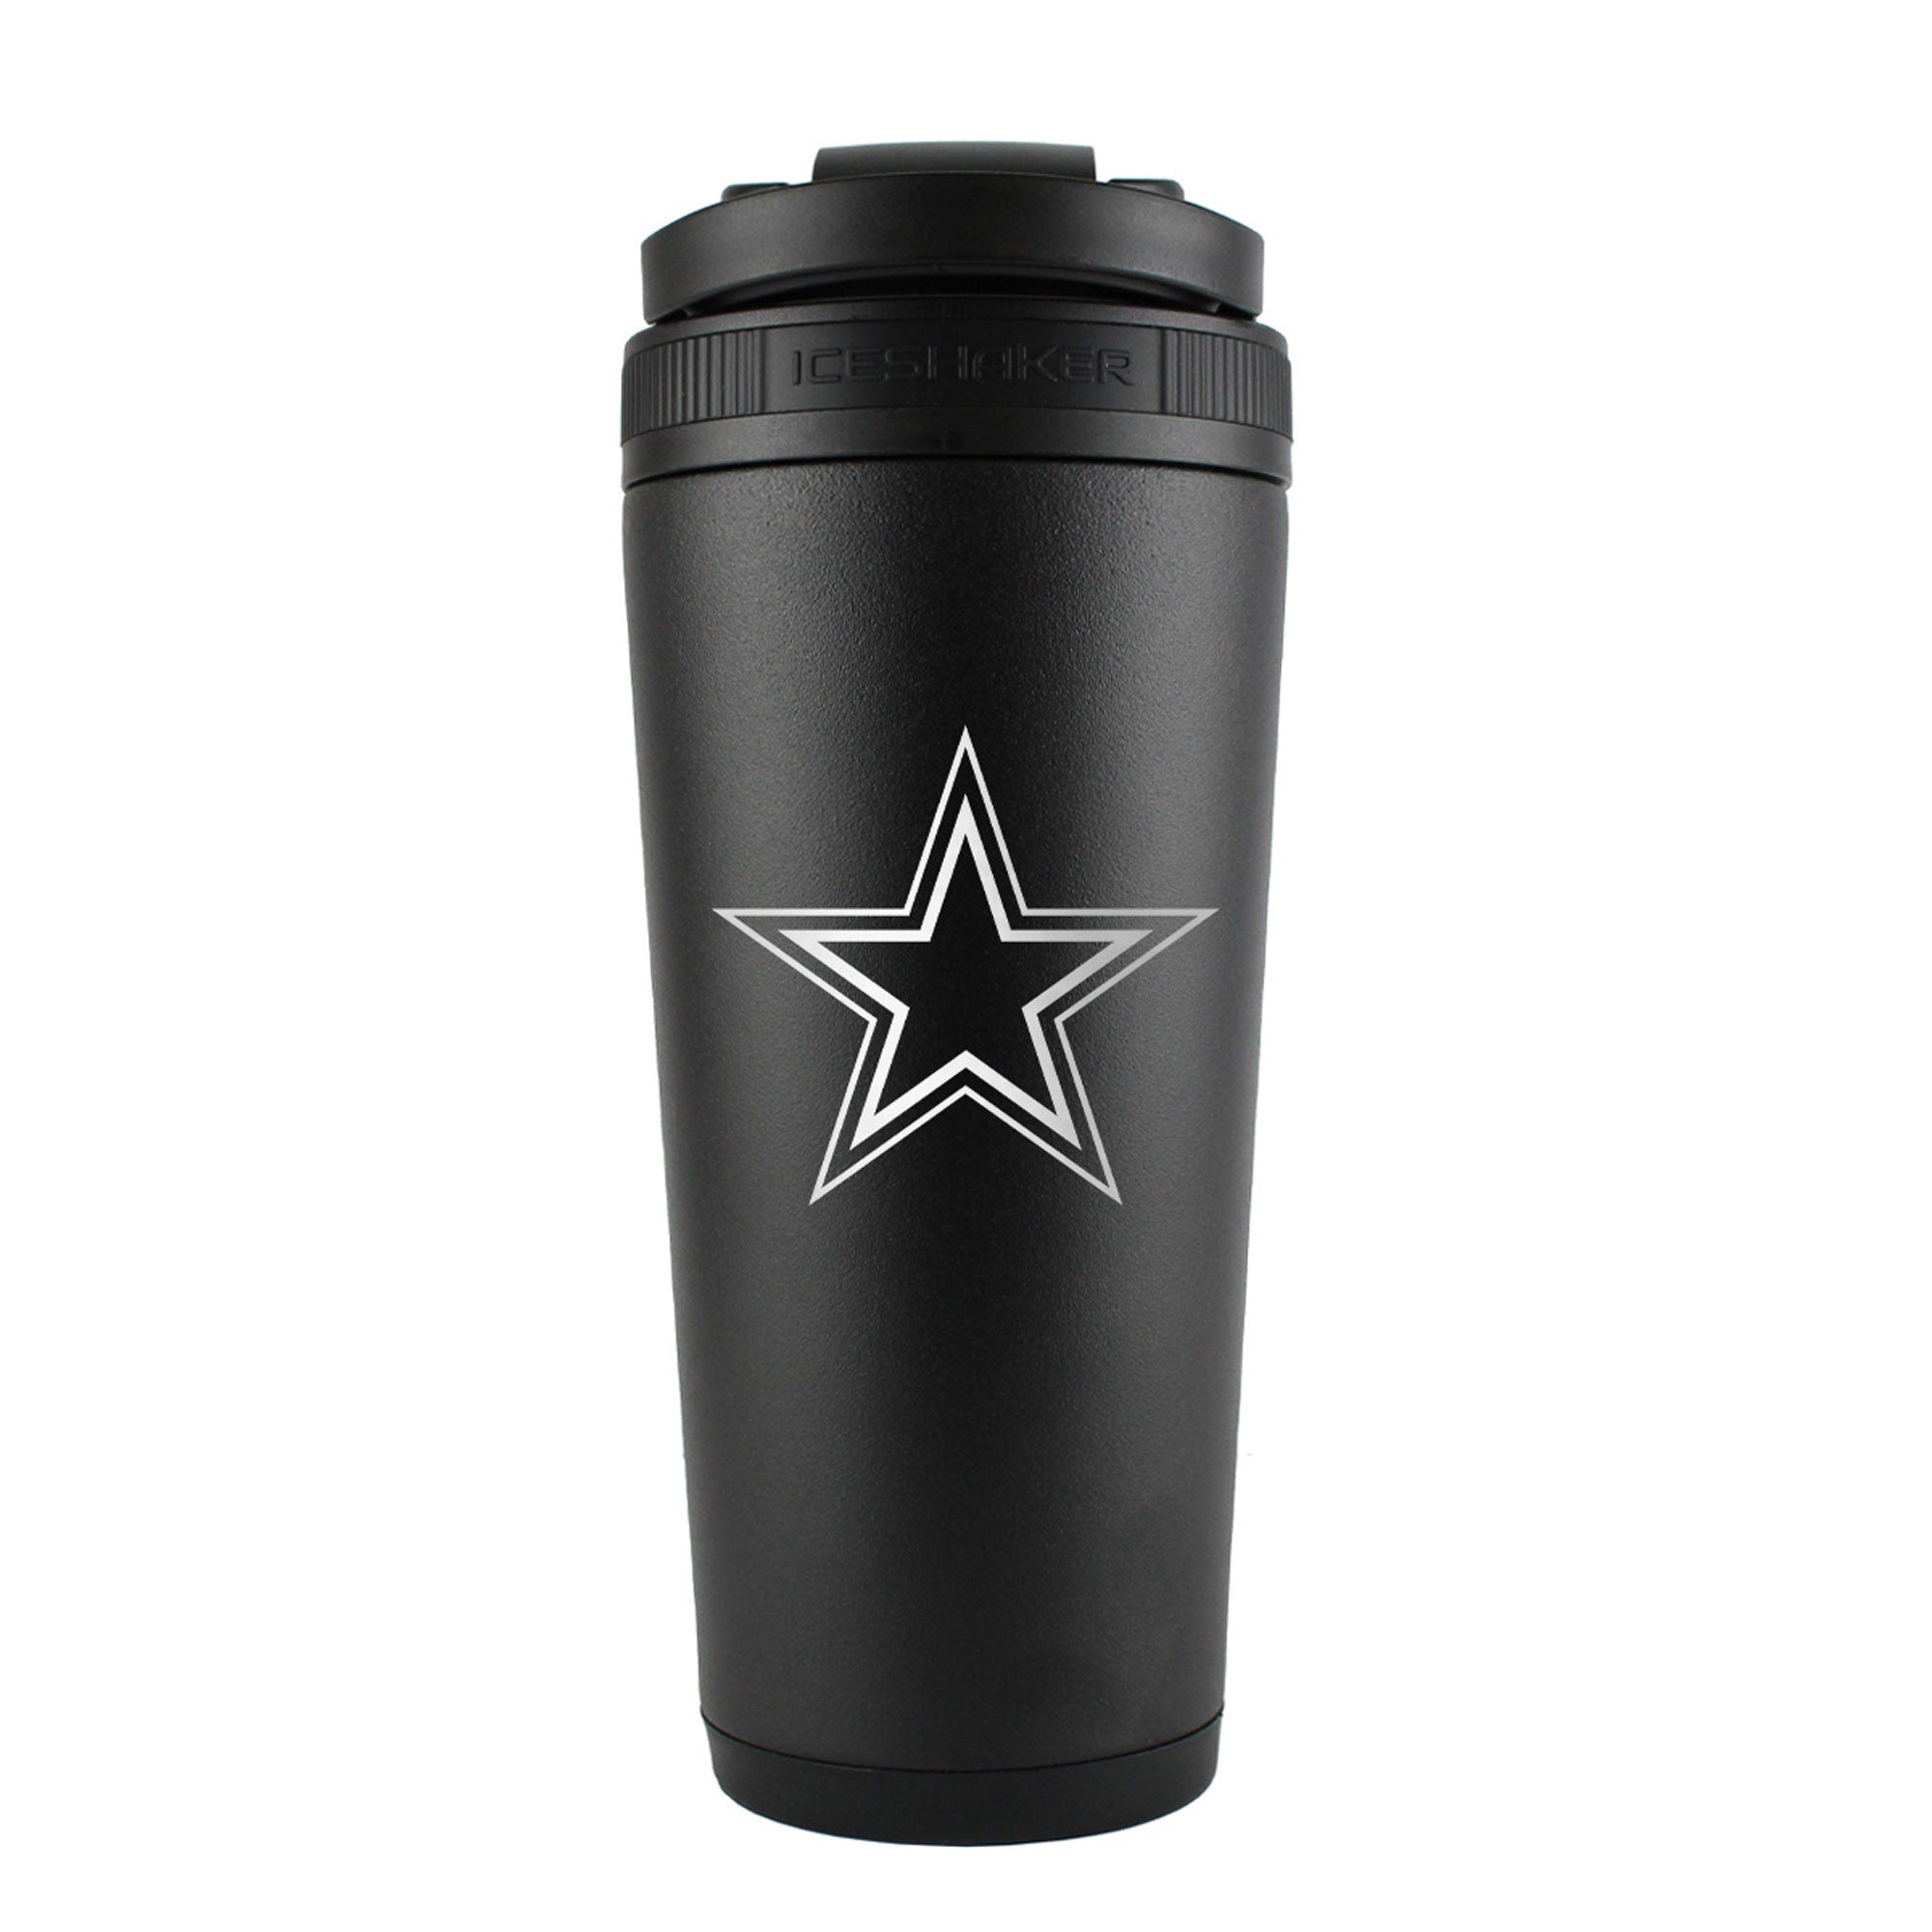 Officially Licensed Dallas Cowboys 26oz Ice Shaker - Black